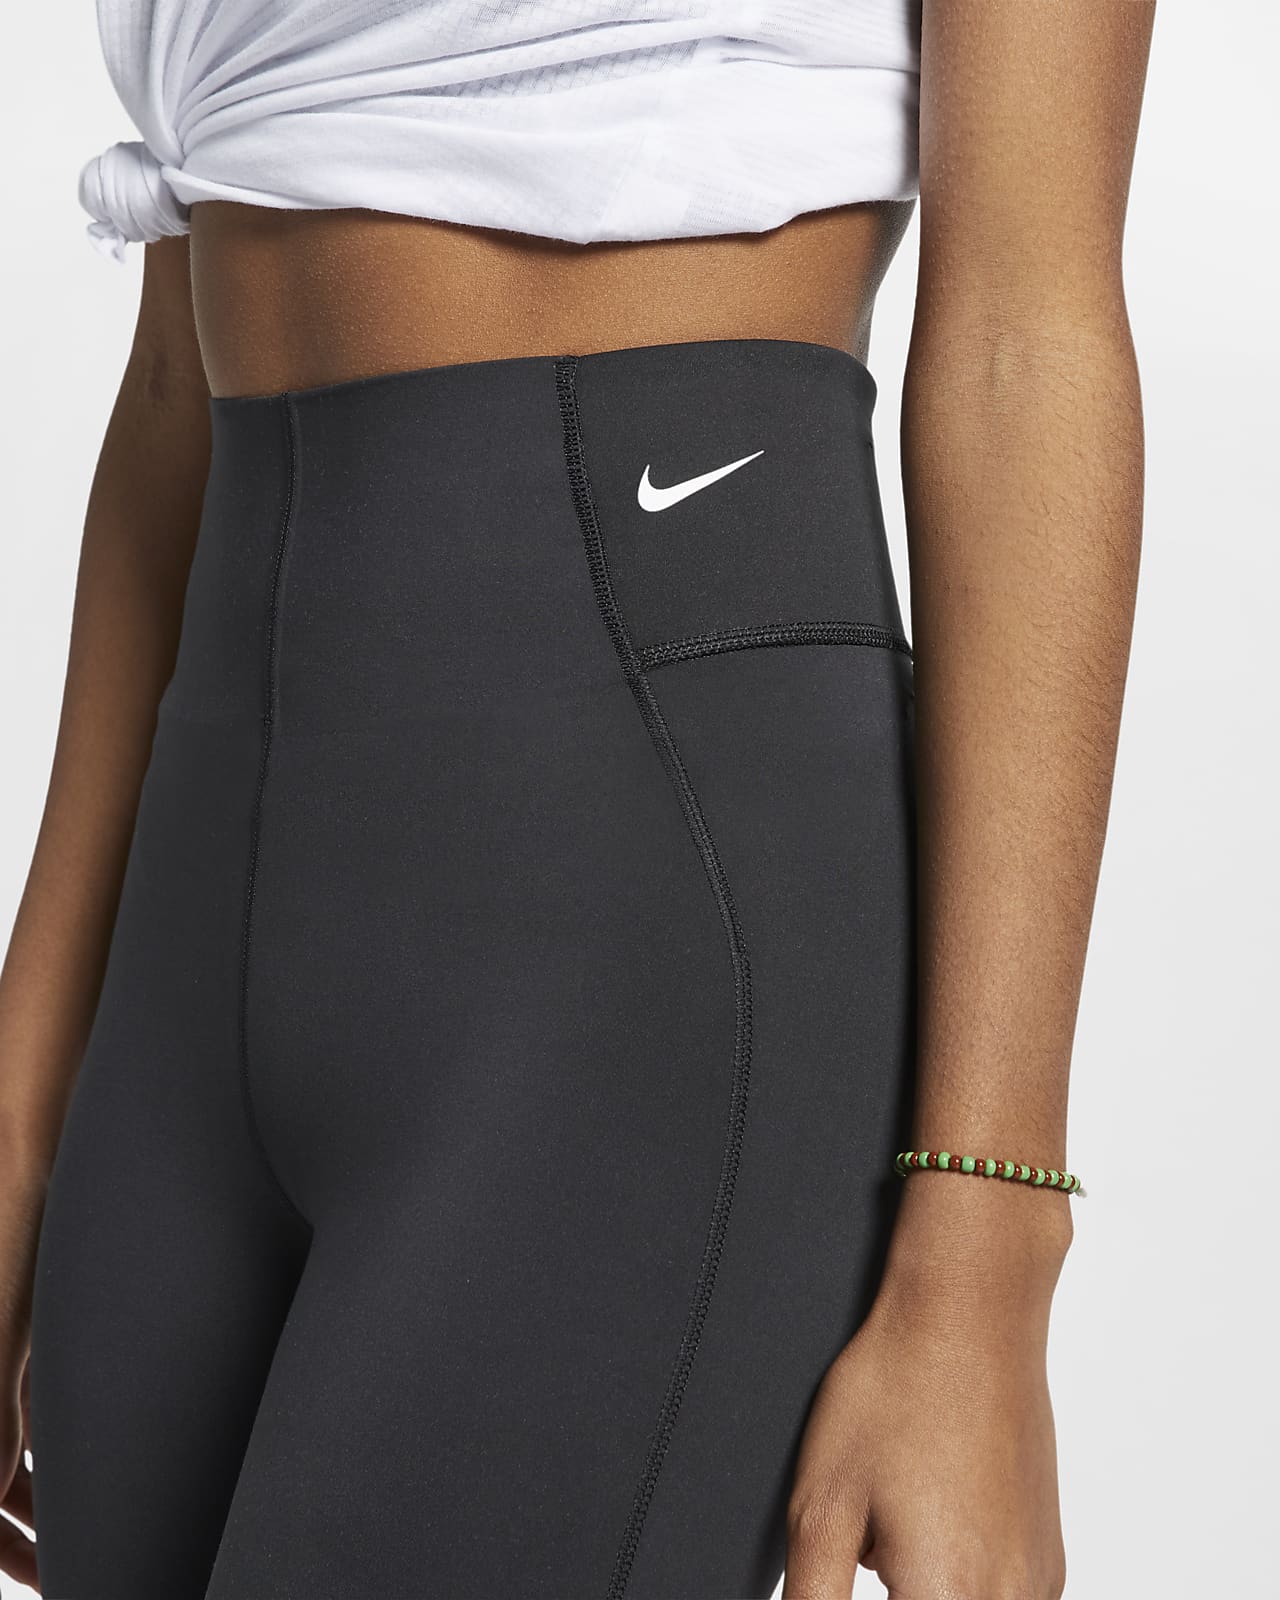 nike victory tights ladies review